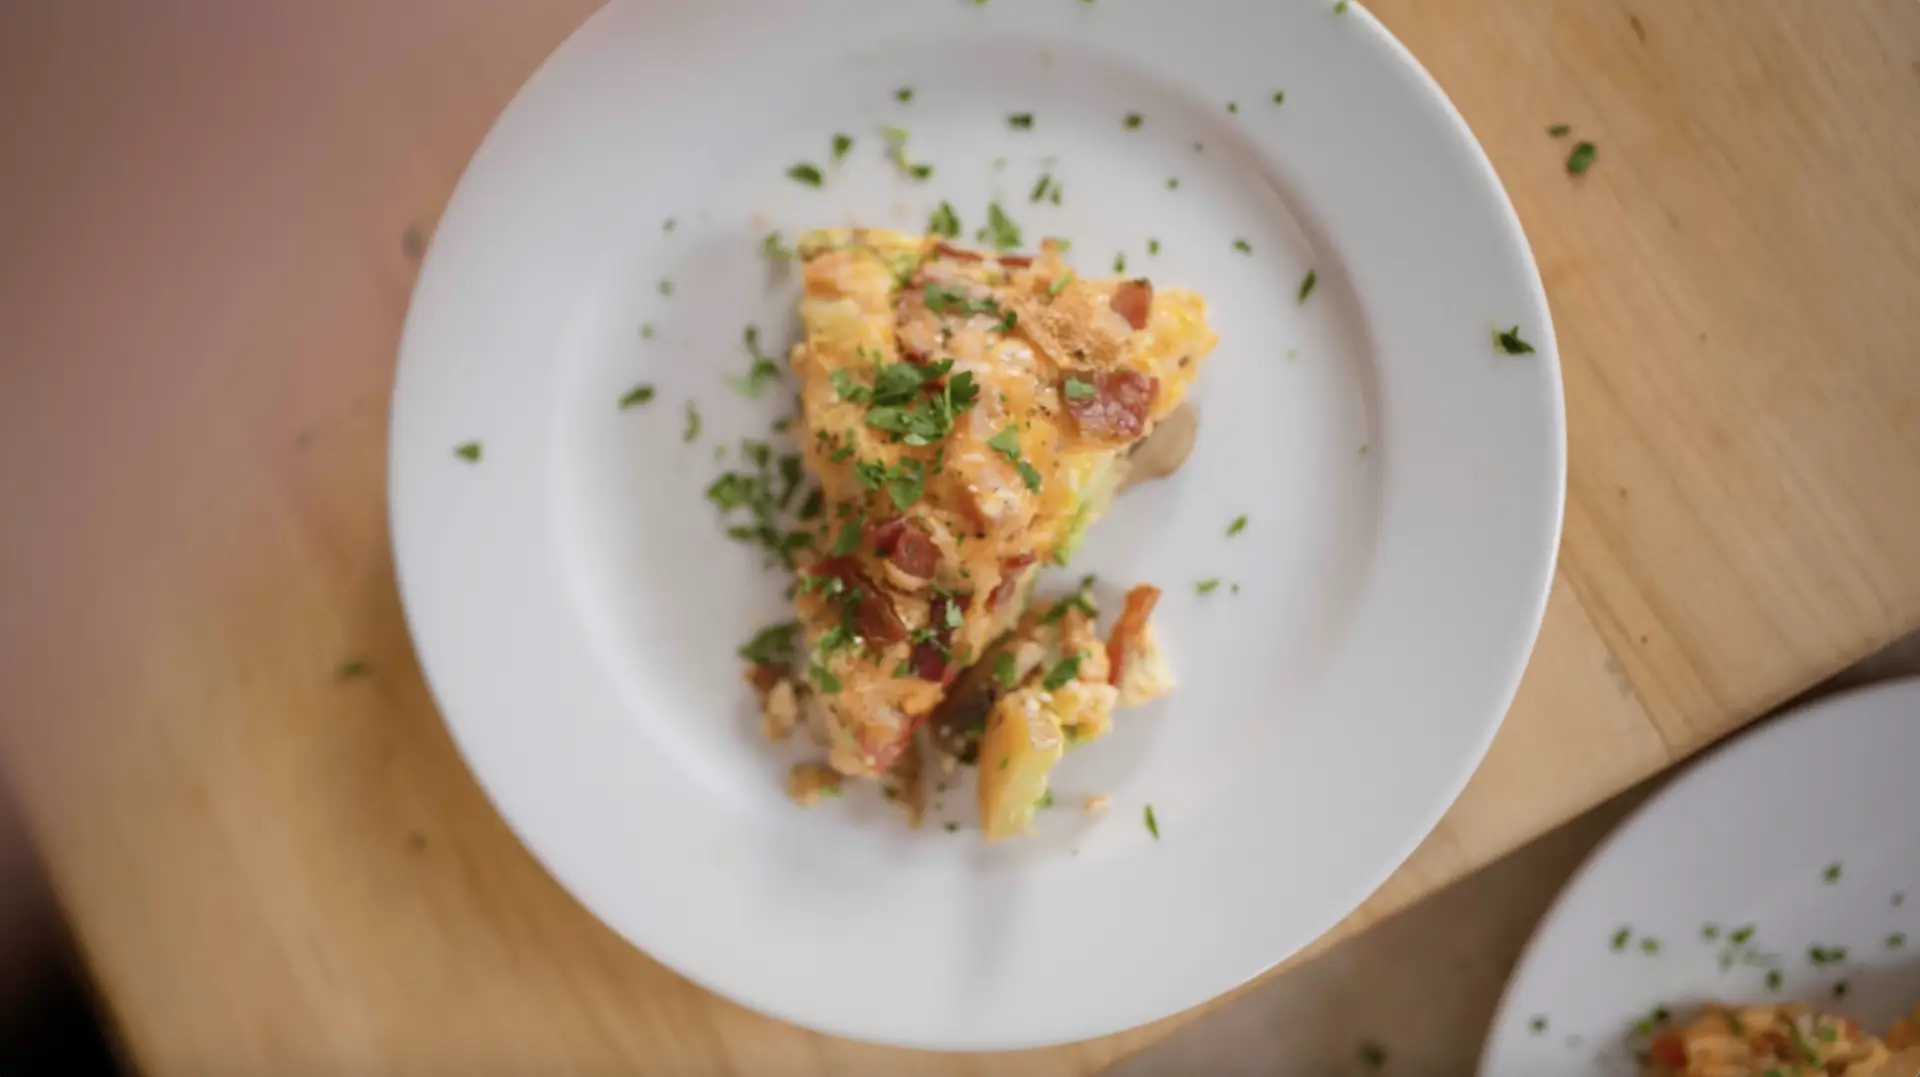 A piece of bacon and egg quiche on a plate.